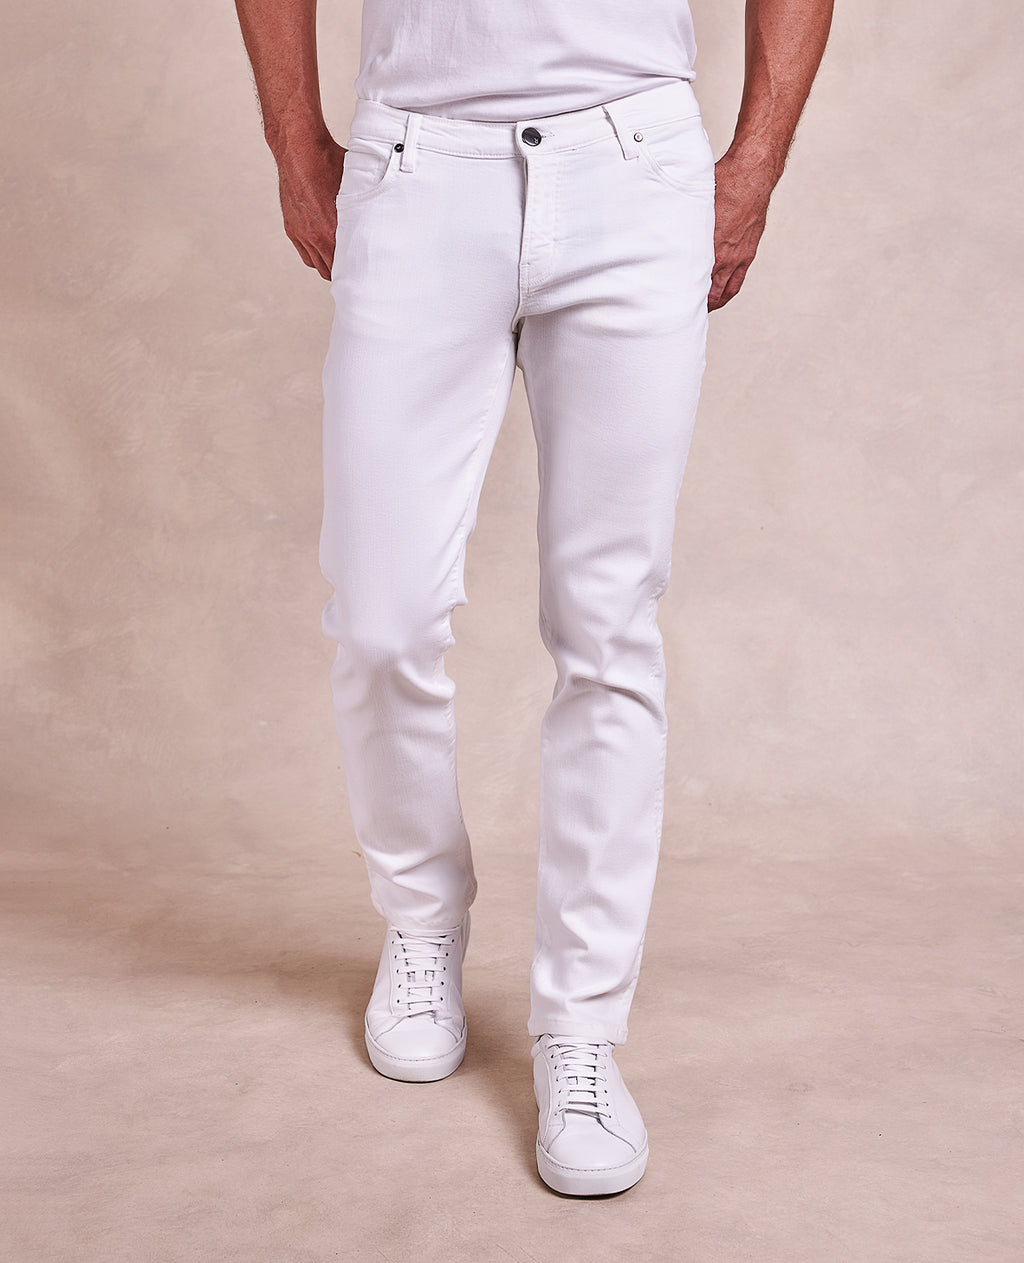 R51 Pant - French Twill Stretch 5-Pocket - White